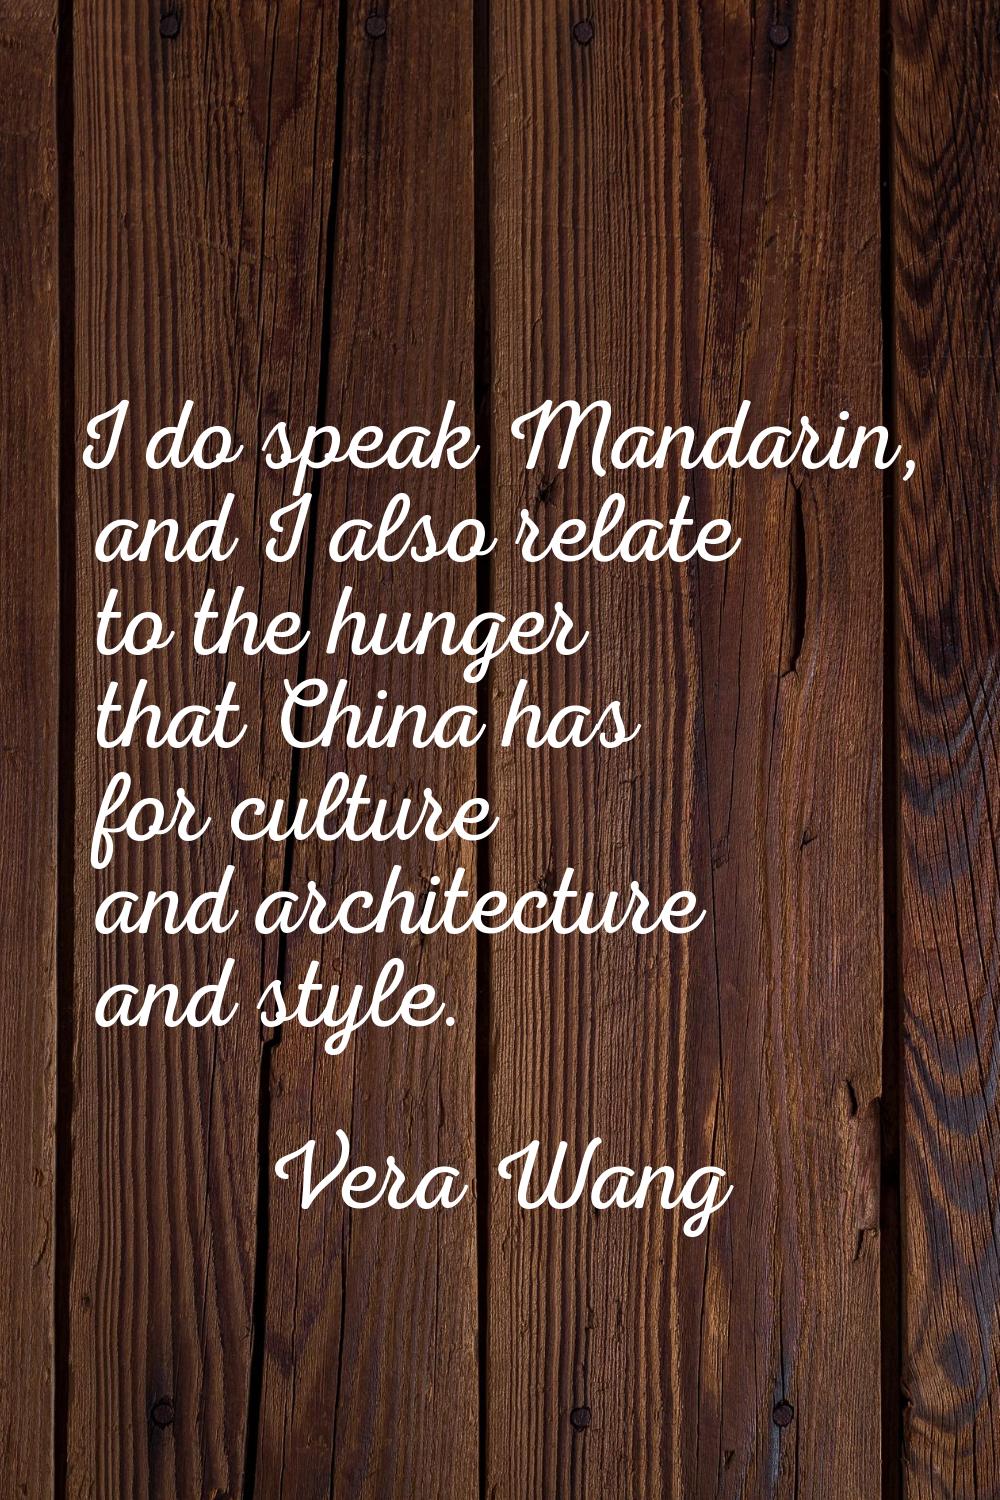 I do speak Mandarin, and I also relate to the hunger that China has for culture and architecture an